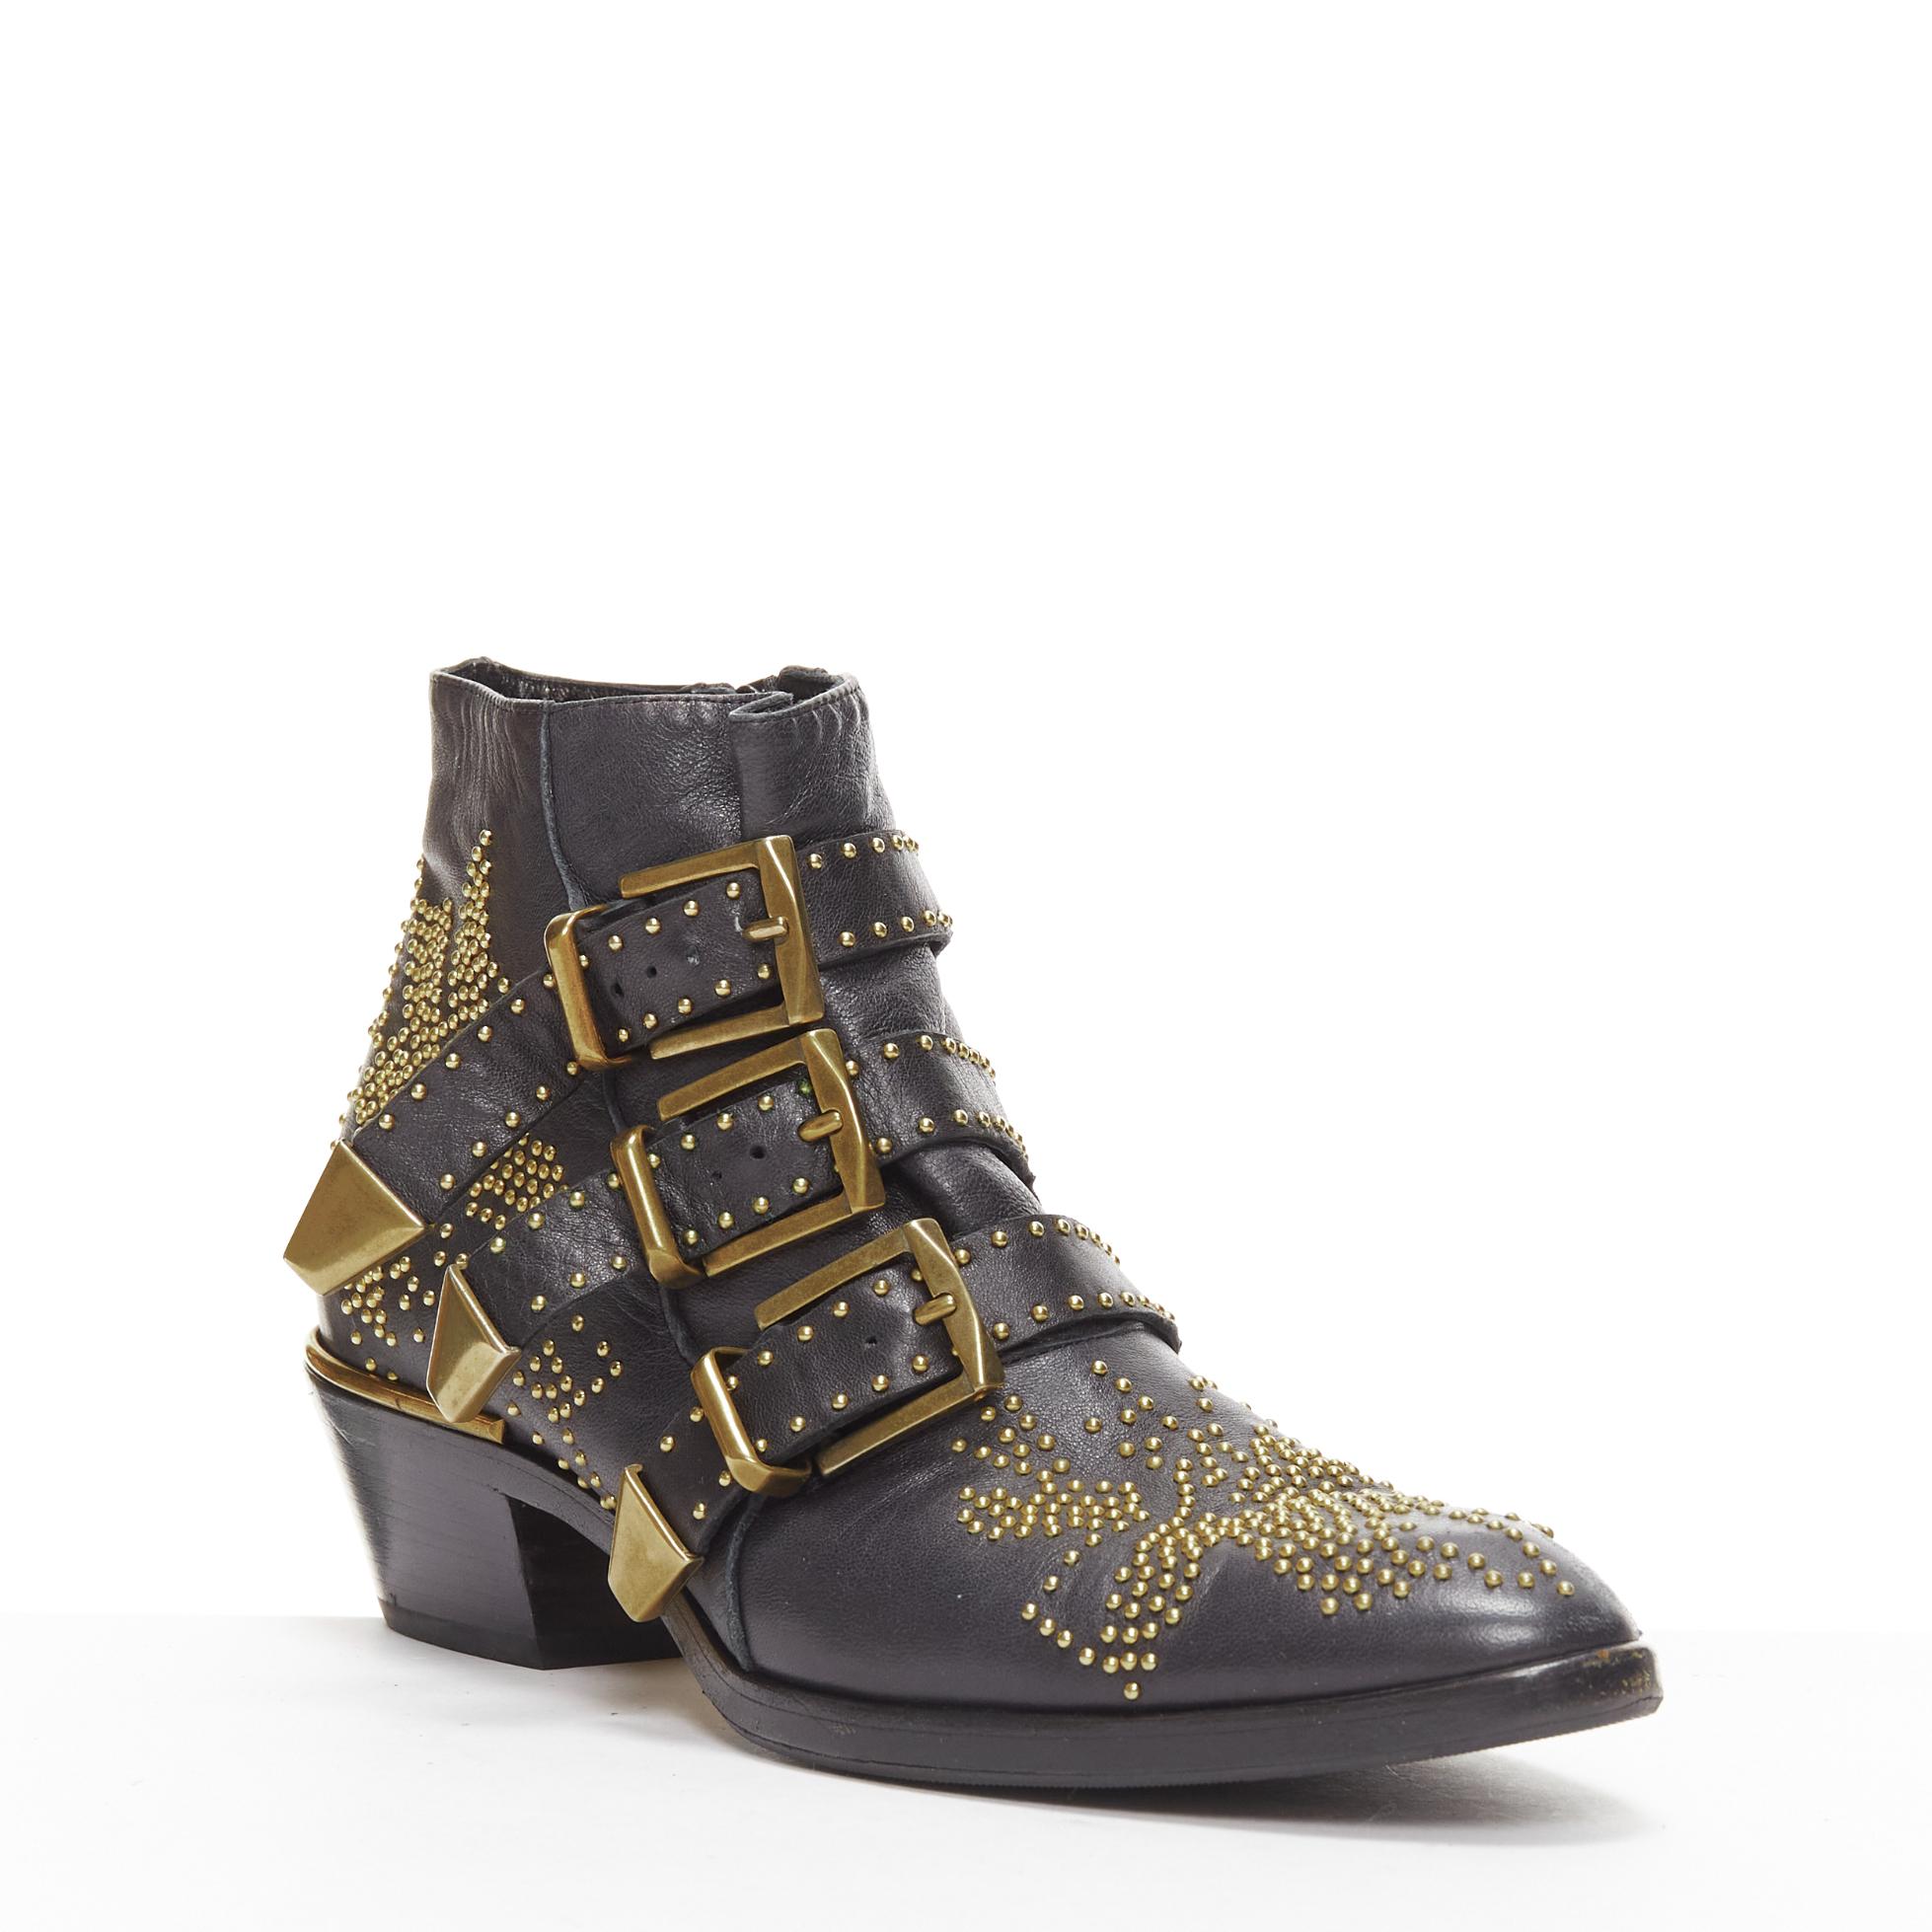 CHLOE Susanna black gold micro stud floral embellished buckle ankle boot EU37
Reference: TGAS/D01152
Brand: Chloe
Model: Susanna
Material: Leather, Metal
Color: Black, Gold
Pattern: Floral
Closure: Zip
Lining: Black Leather
Extra Details: